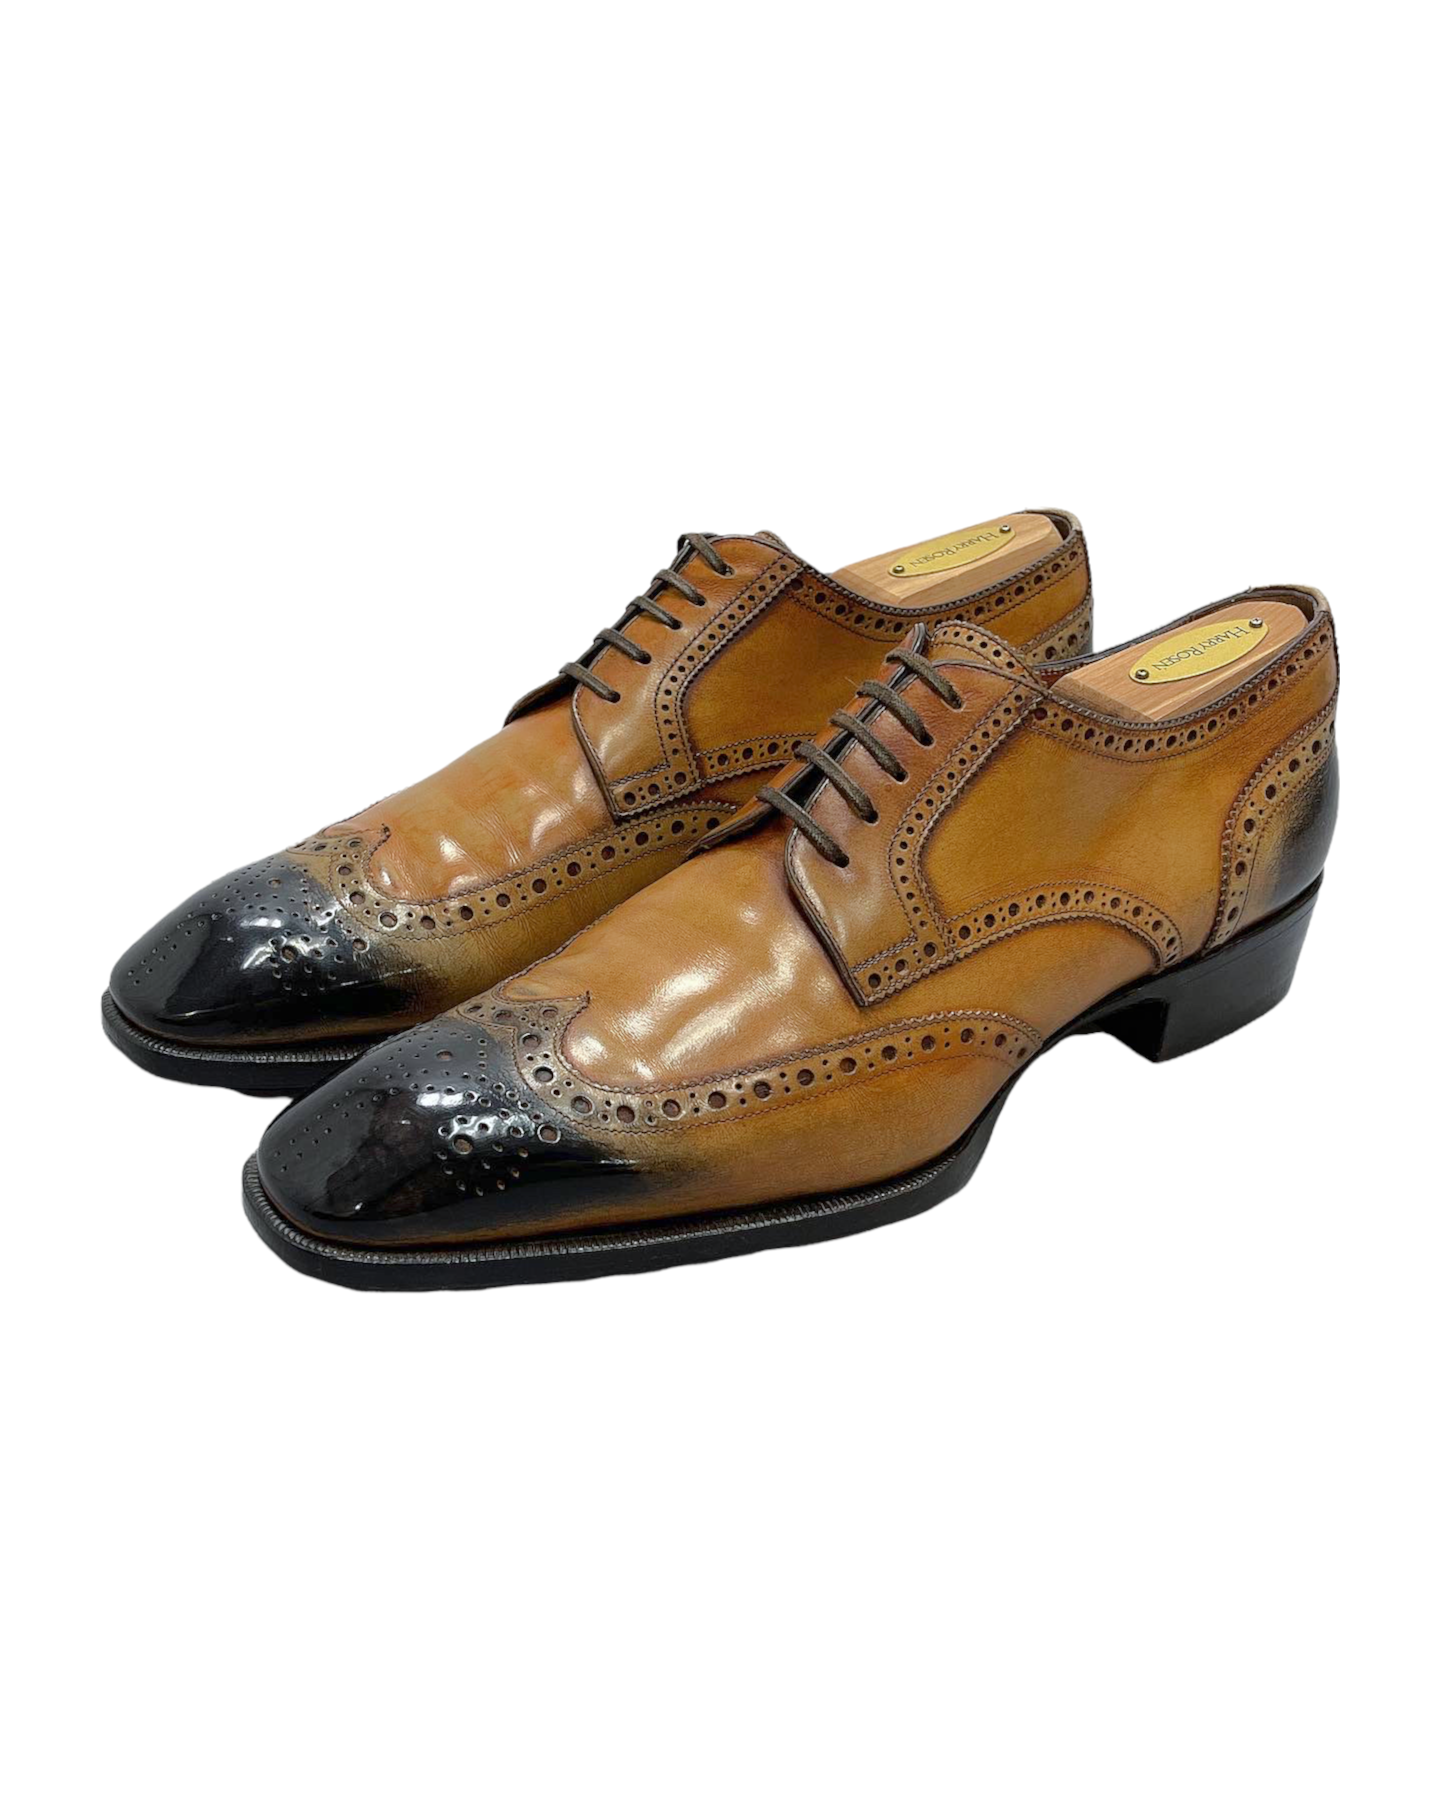 Tom Ford Light Brown Leather Oxford Dress Shoe 8.5 D US — Genuine Design luxury consignment Calgary, Canada New & pre-owned clothing, shoes, accessories.